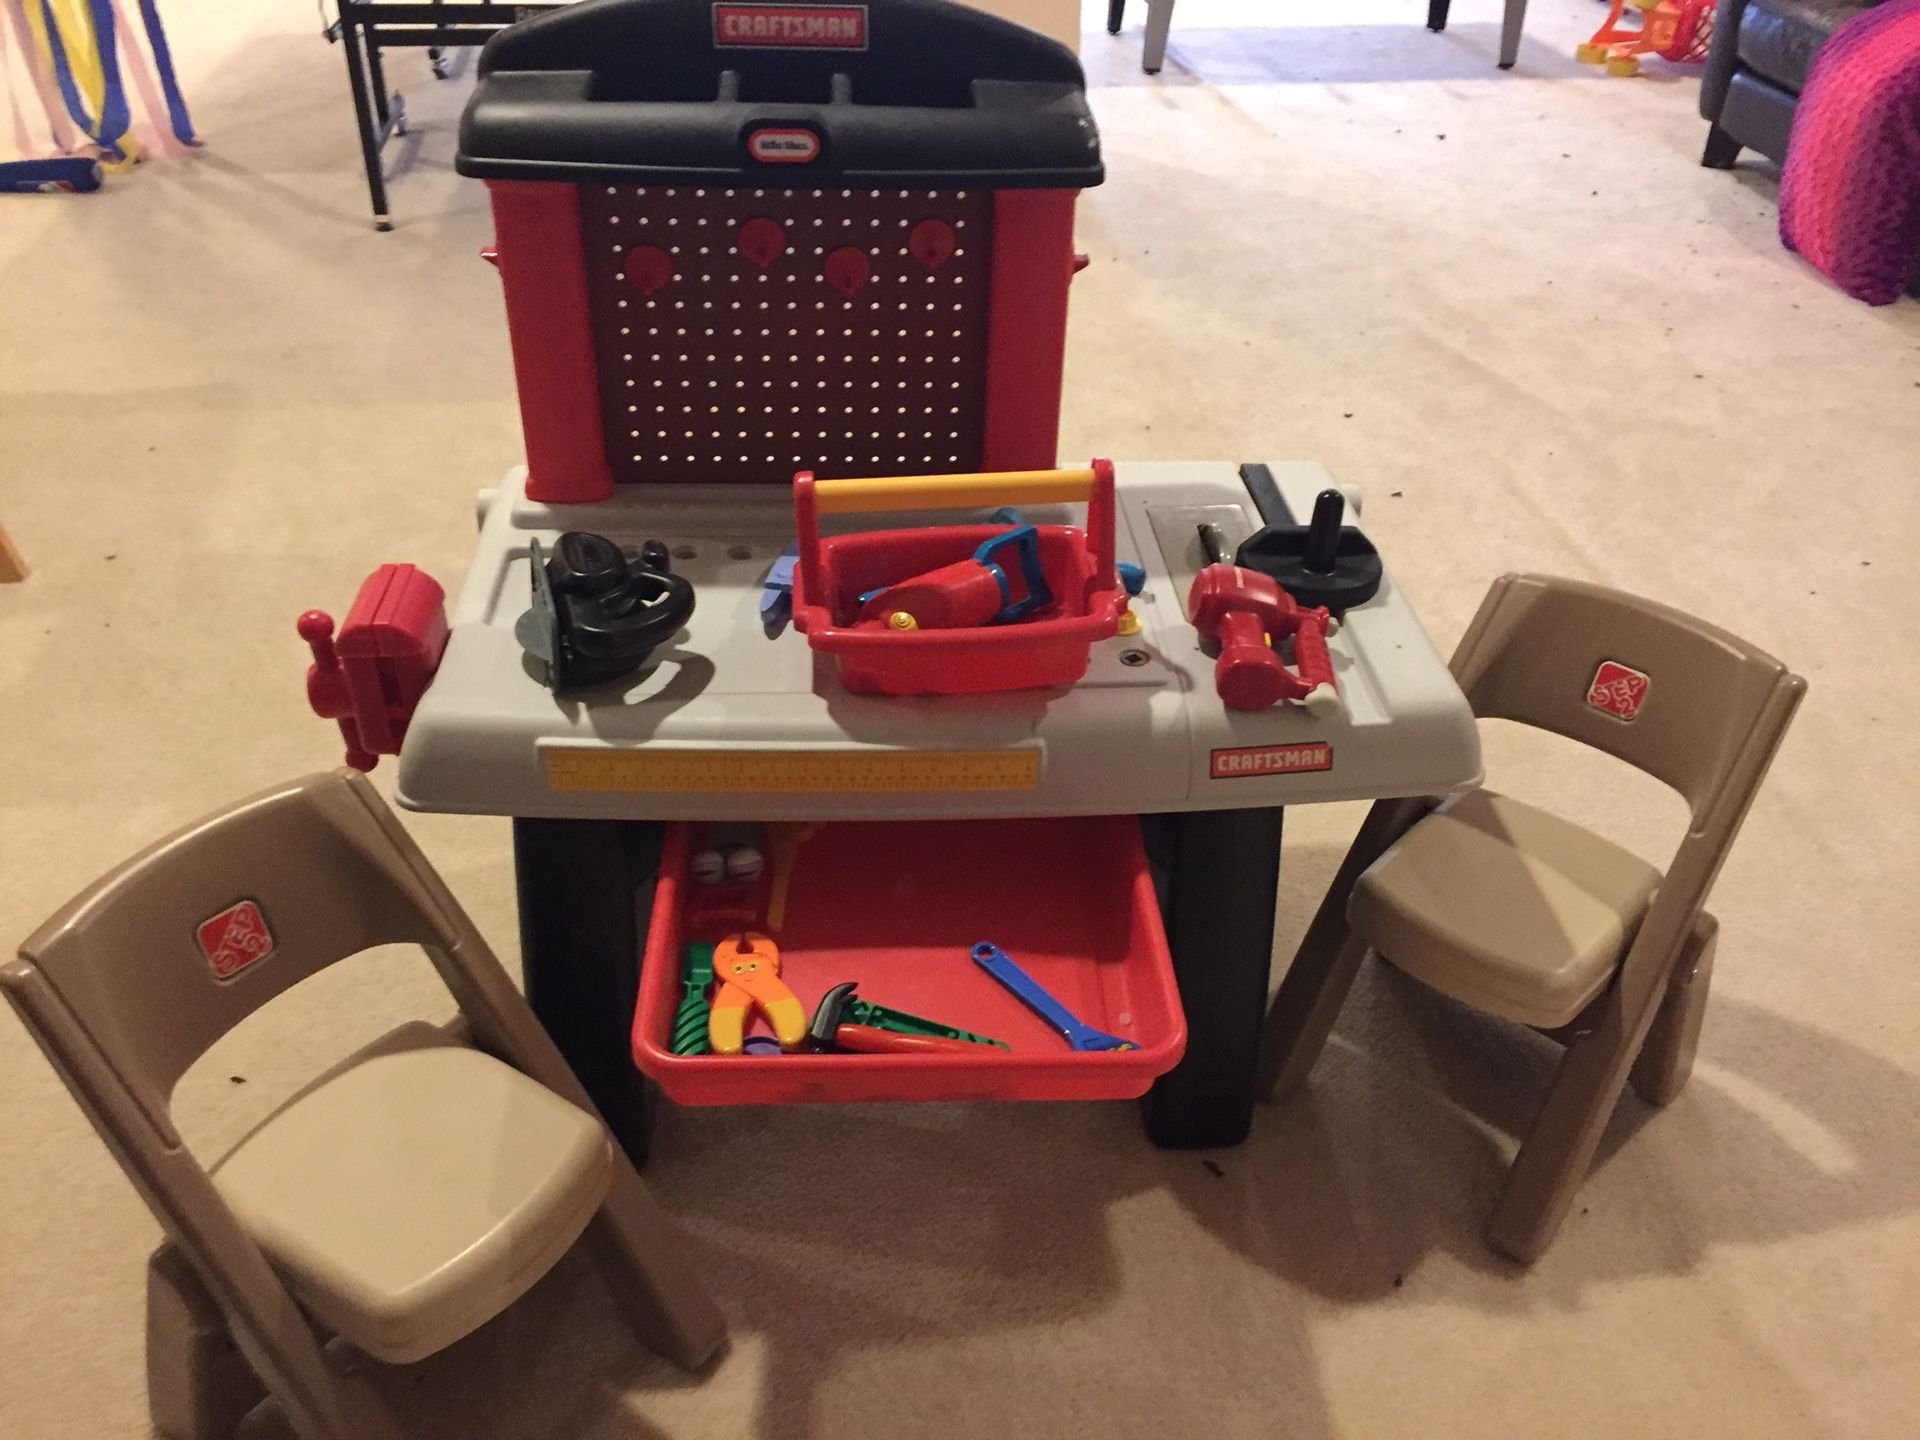 Craftsman kids tool station with 2 chairs and tools